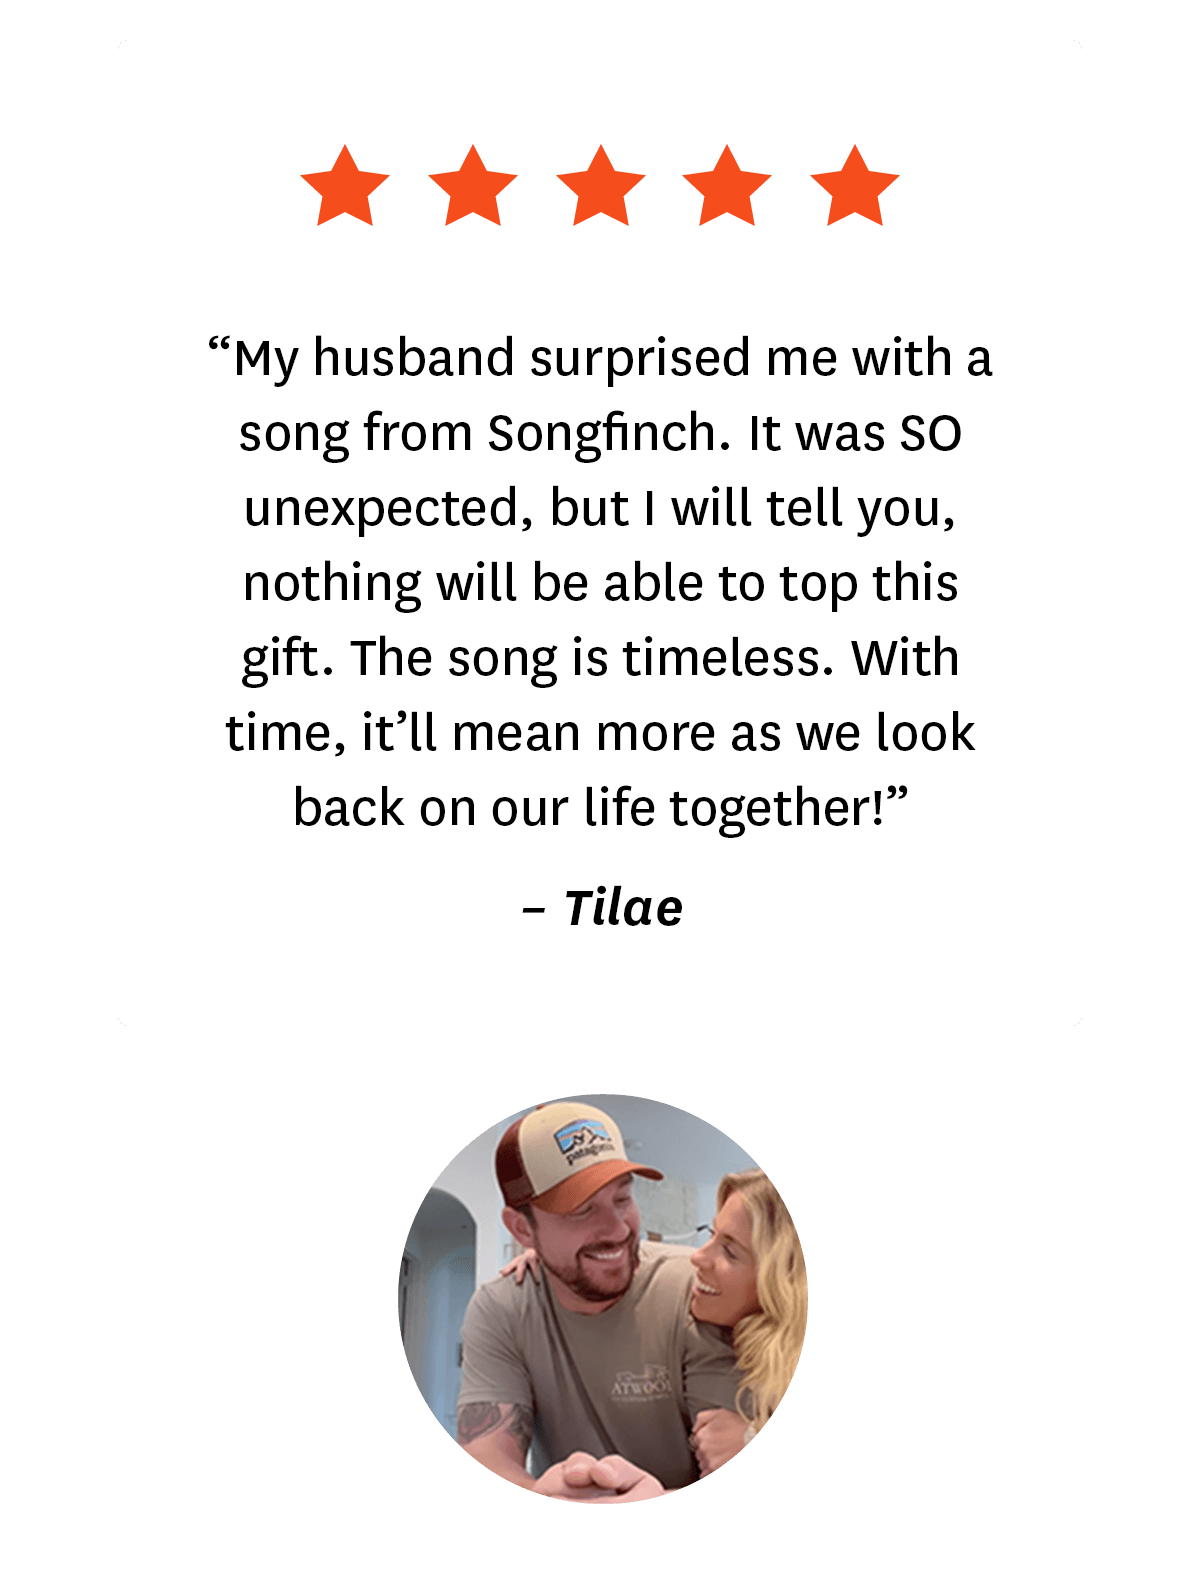 5-star review from Songfinch customer, Tilae: ''My husband surprised me with a song from Songfinch. It was SO unexpected, but I will tell you, nothing will be able to top this gift. The song is timeless. With time, it'll mean more as we look back on our life together.''